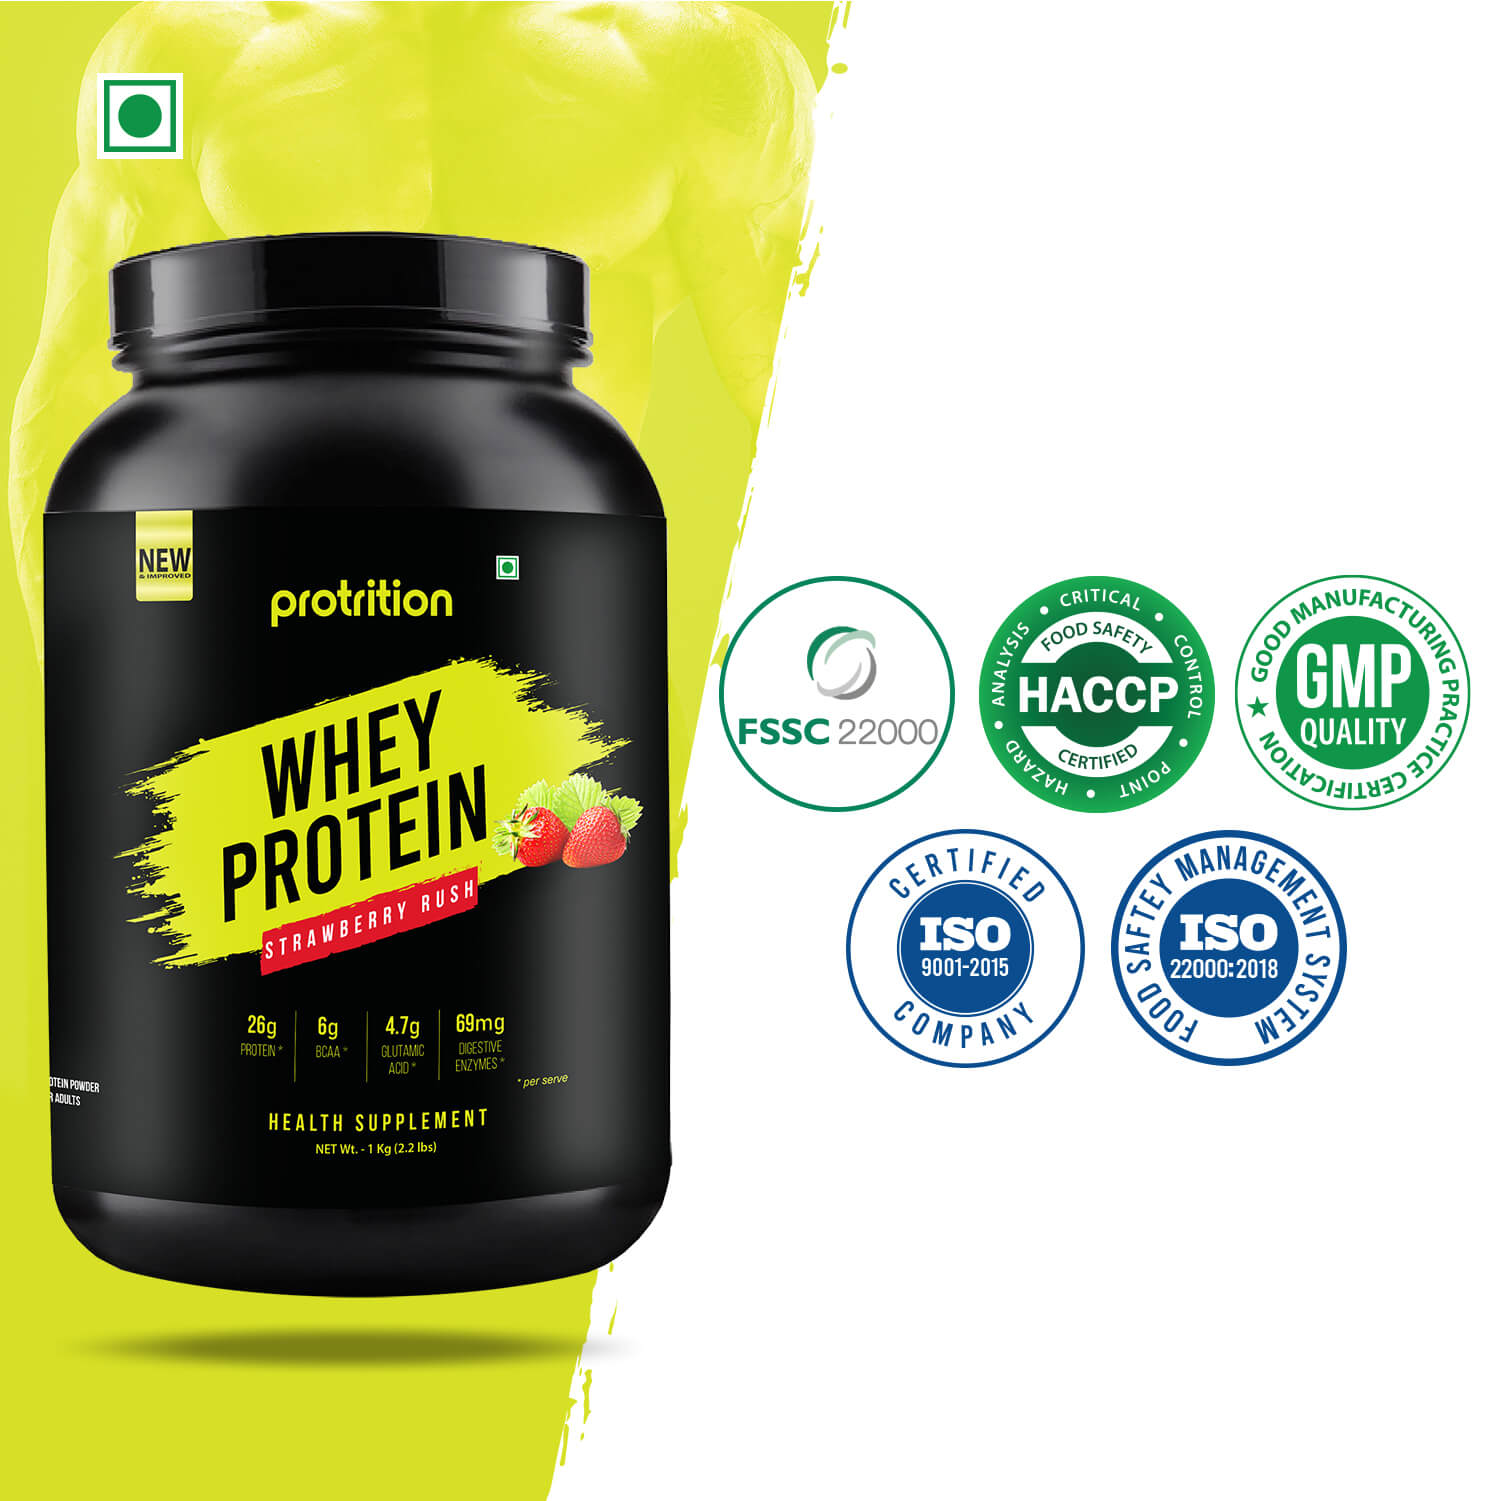 Protrition Whey Protein, 1Kg, Strawberry Rush